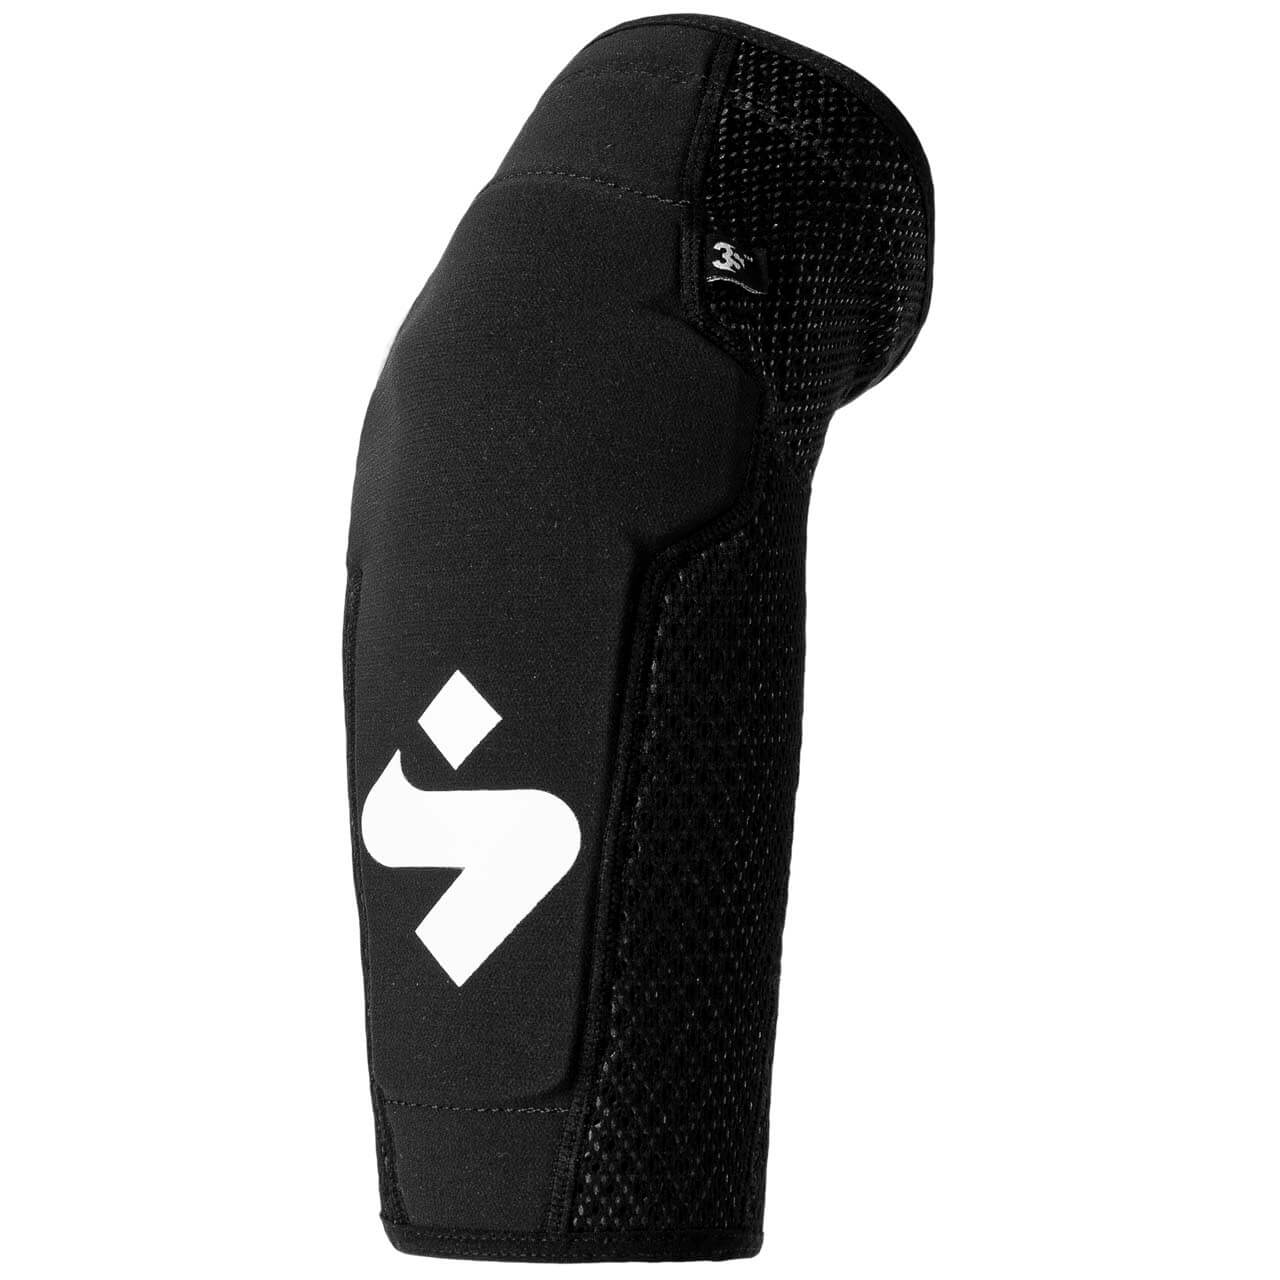 Sweet Protection Knee Guards Light - Black, M